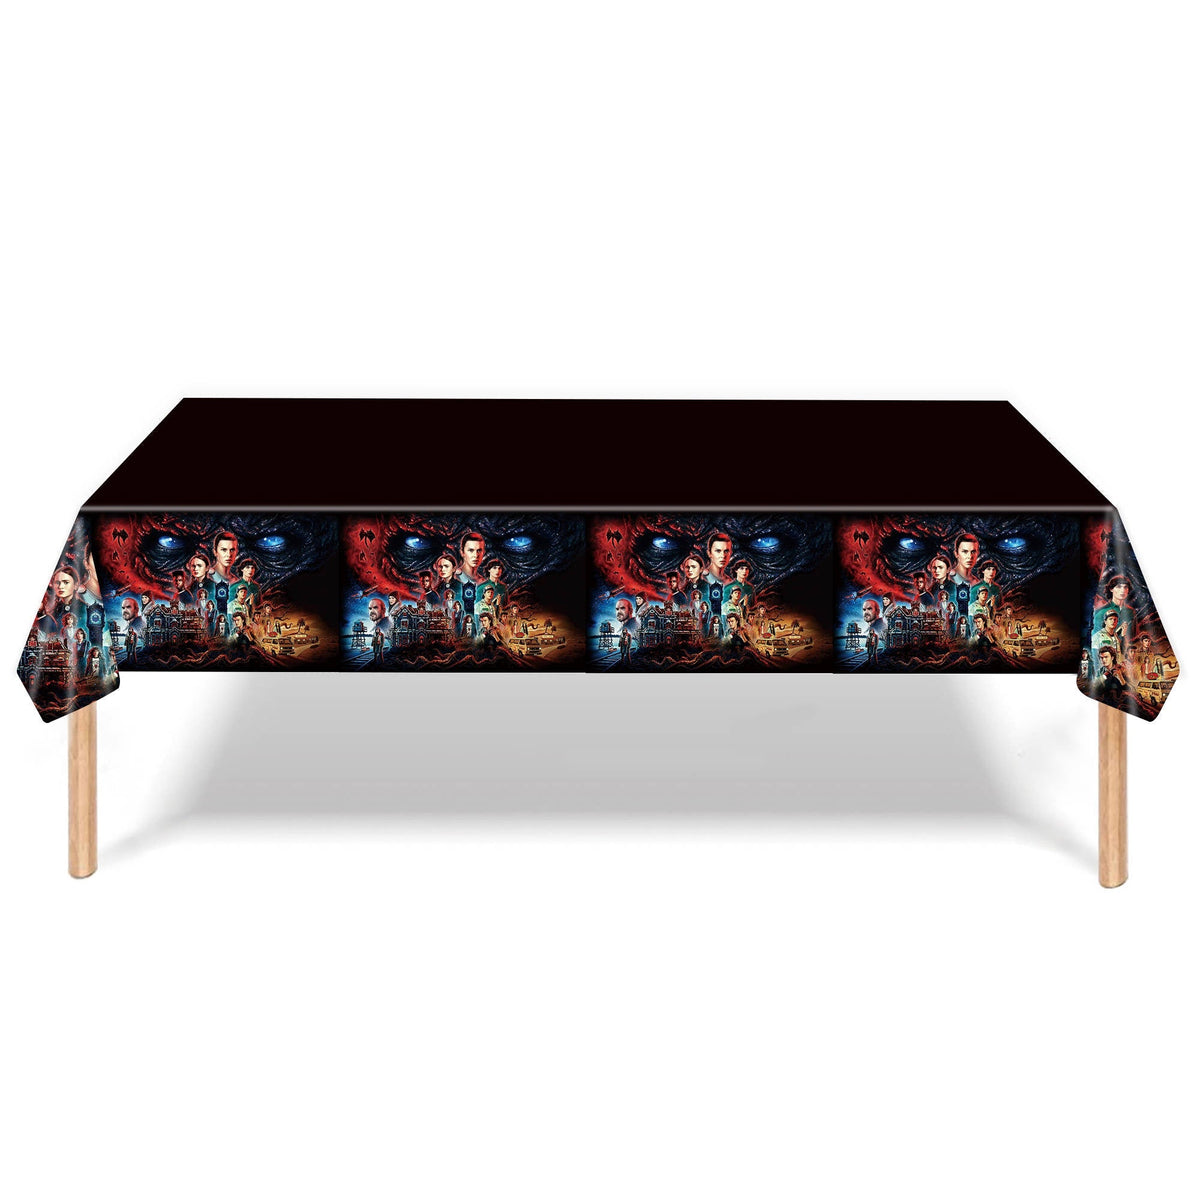 Shaoxing Keqiao Chengyou Textile Co.,Ltd Halloween Stranger Things Rectangular Plastic Table Cover, 51 x 86 Inches 810077657874